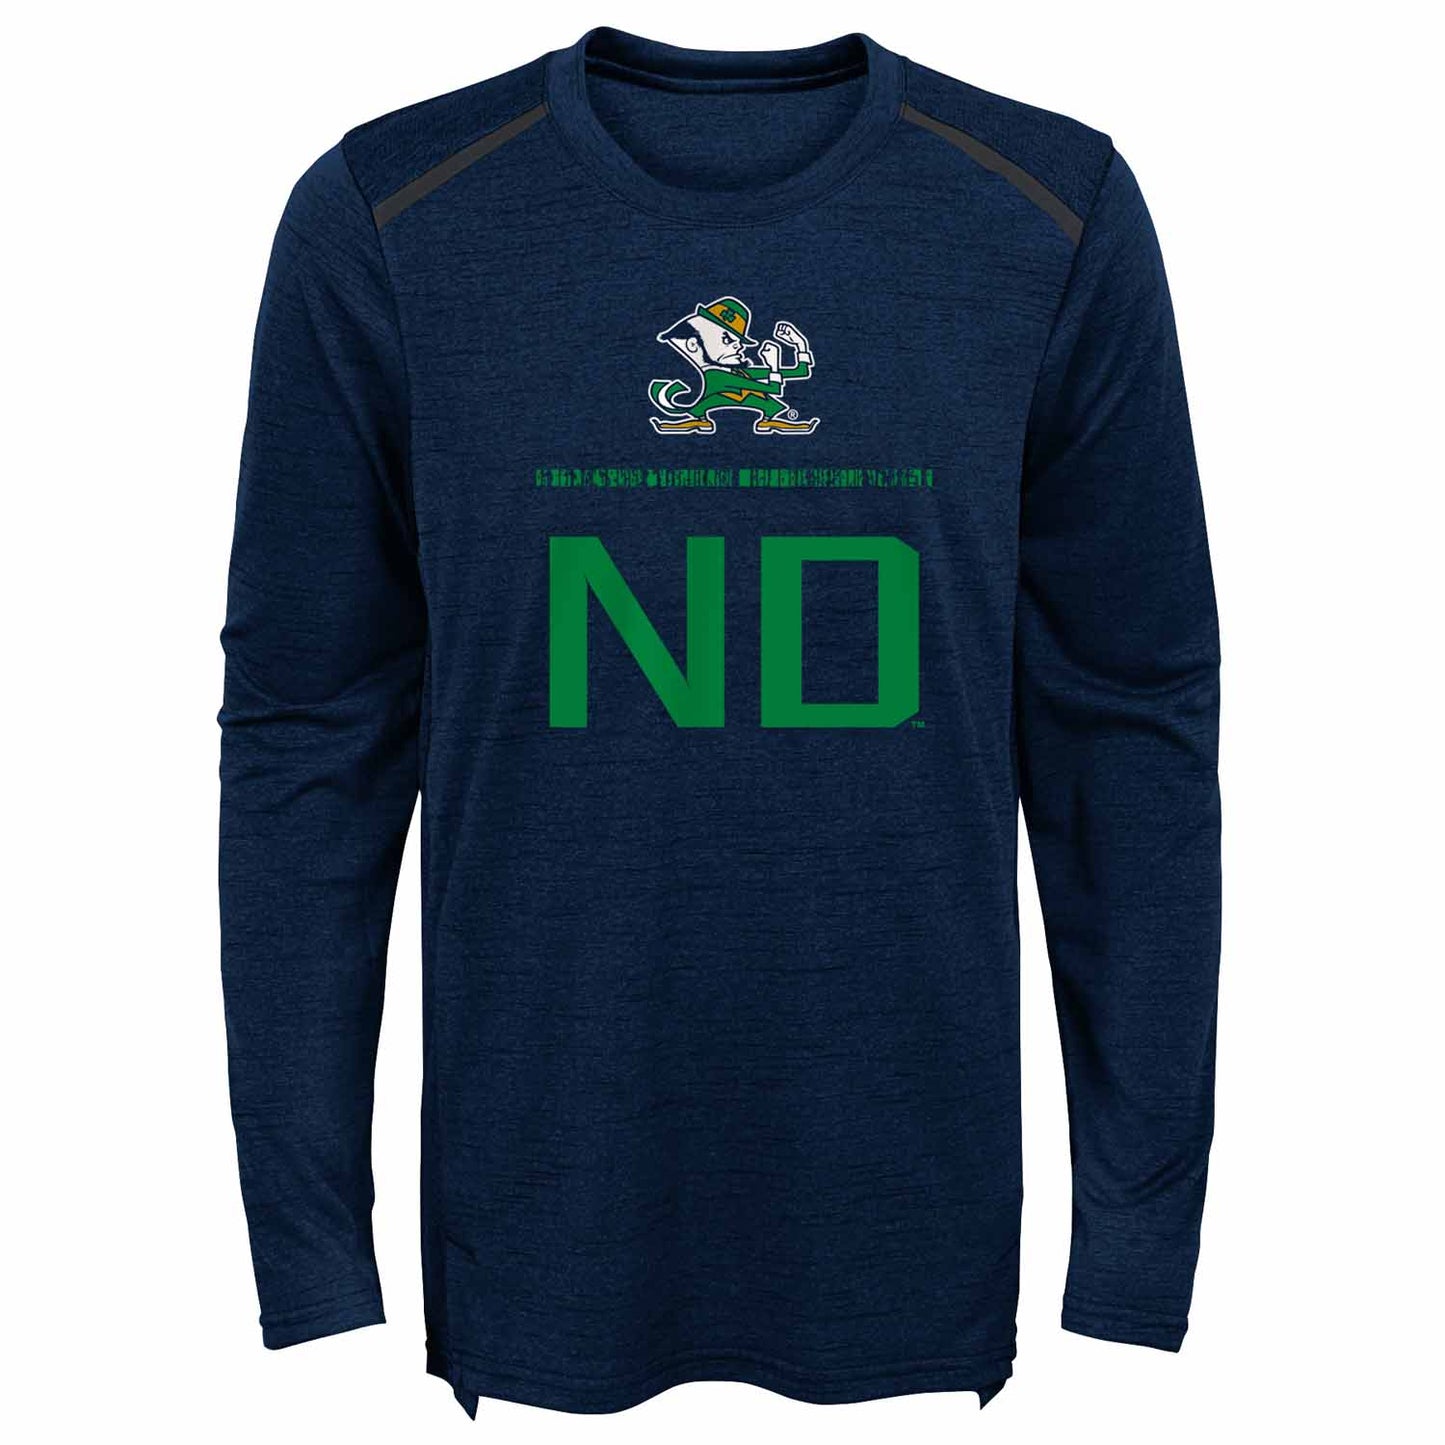 Notre Dame Fighting Irish Youth Static Long Sleeve Performance Top - Navy